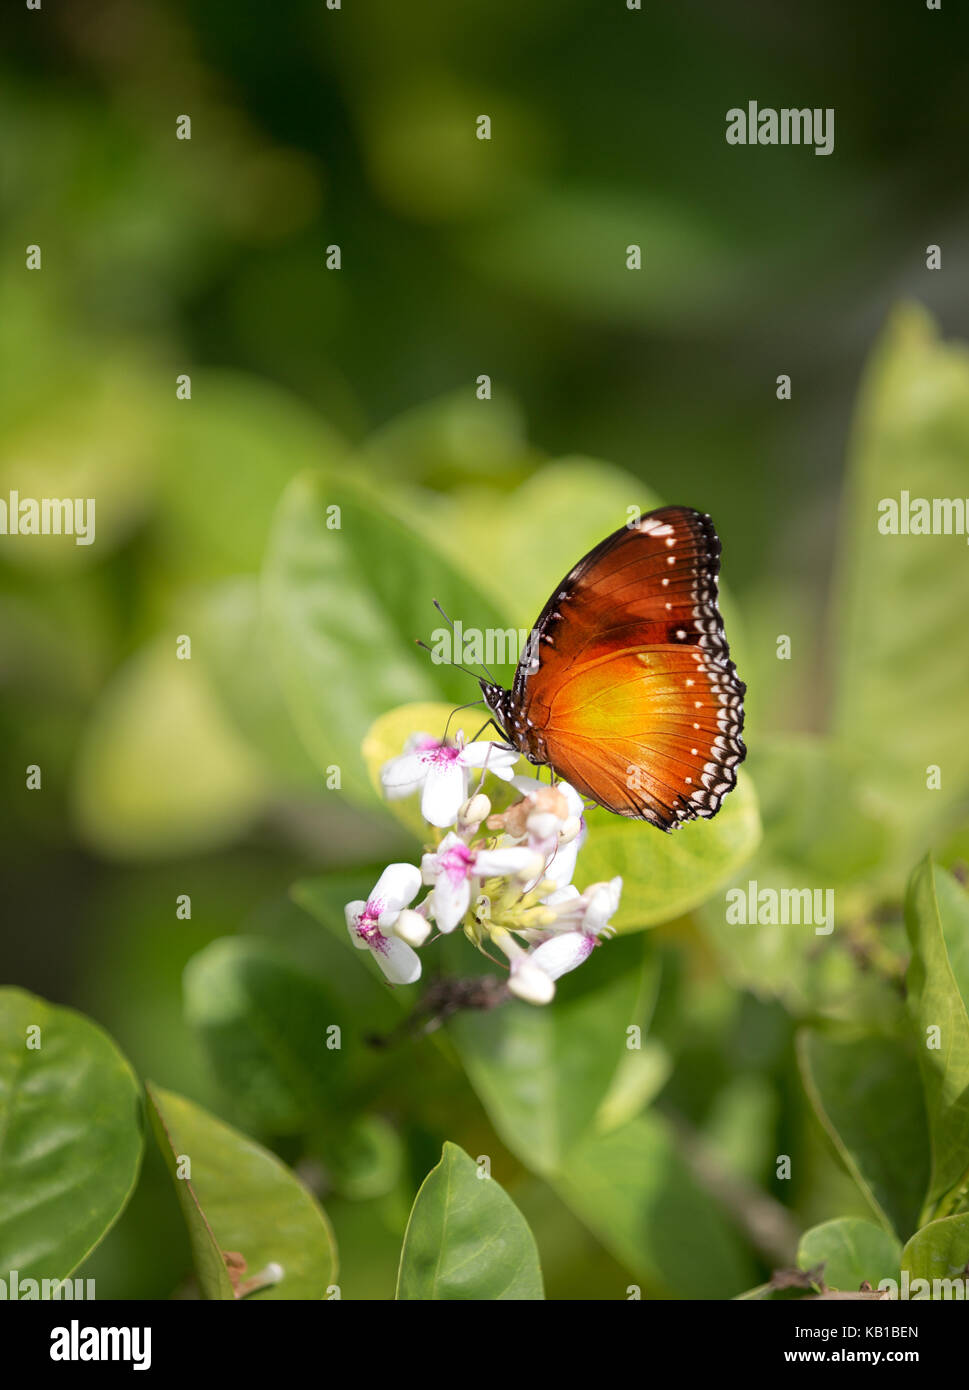 Tiny, delicate butterfly feeding on a summer flower against green background Stock Photo